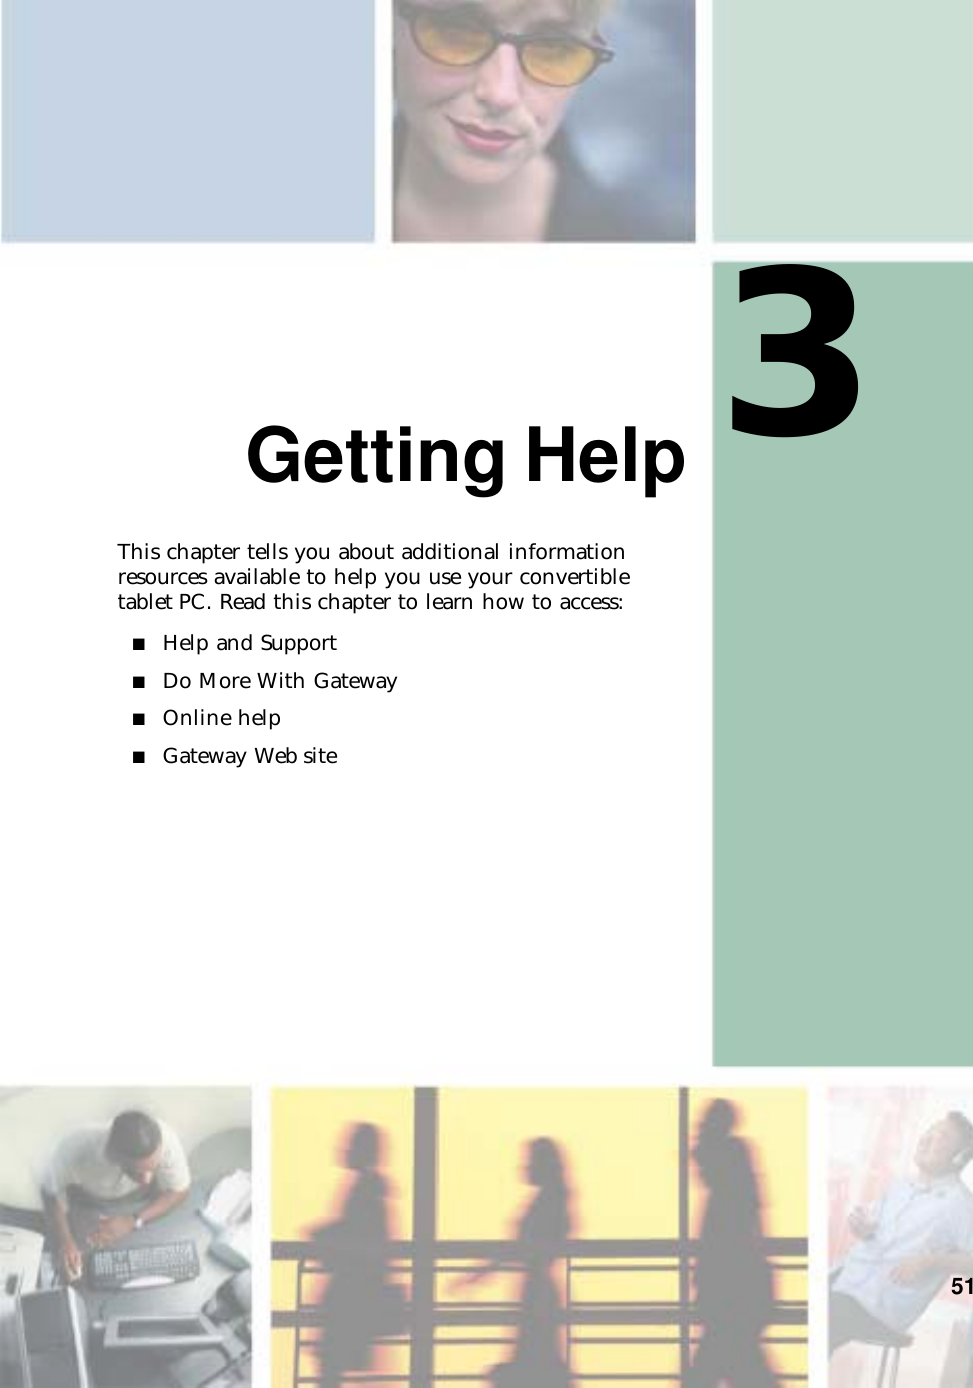 351Getting HelpThis chapter tells you about additional information resources available to help you use your convertible tablet PC. Read this chapter to learn how to access:■Help and Support■Do More With Gateway■Online help■Gateway Web site